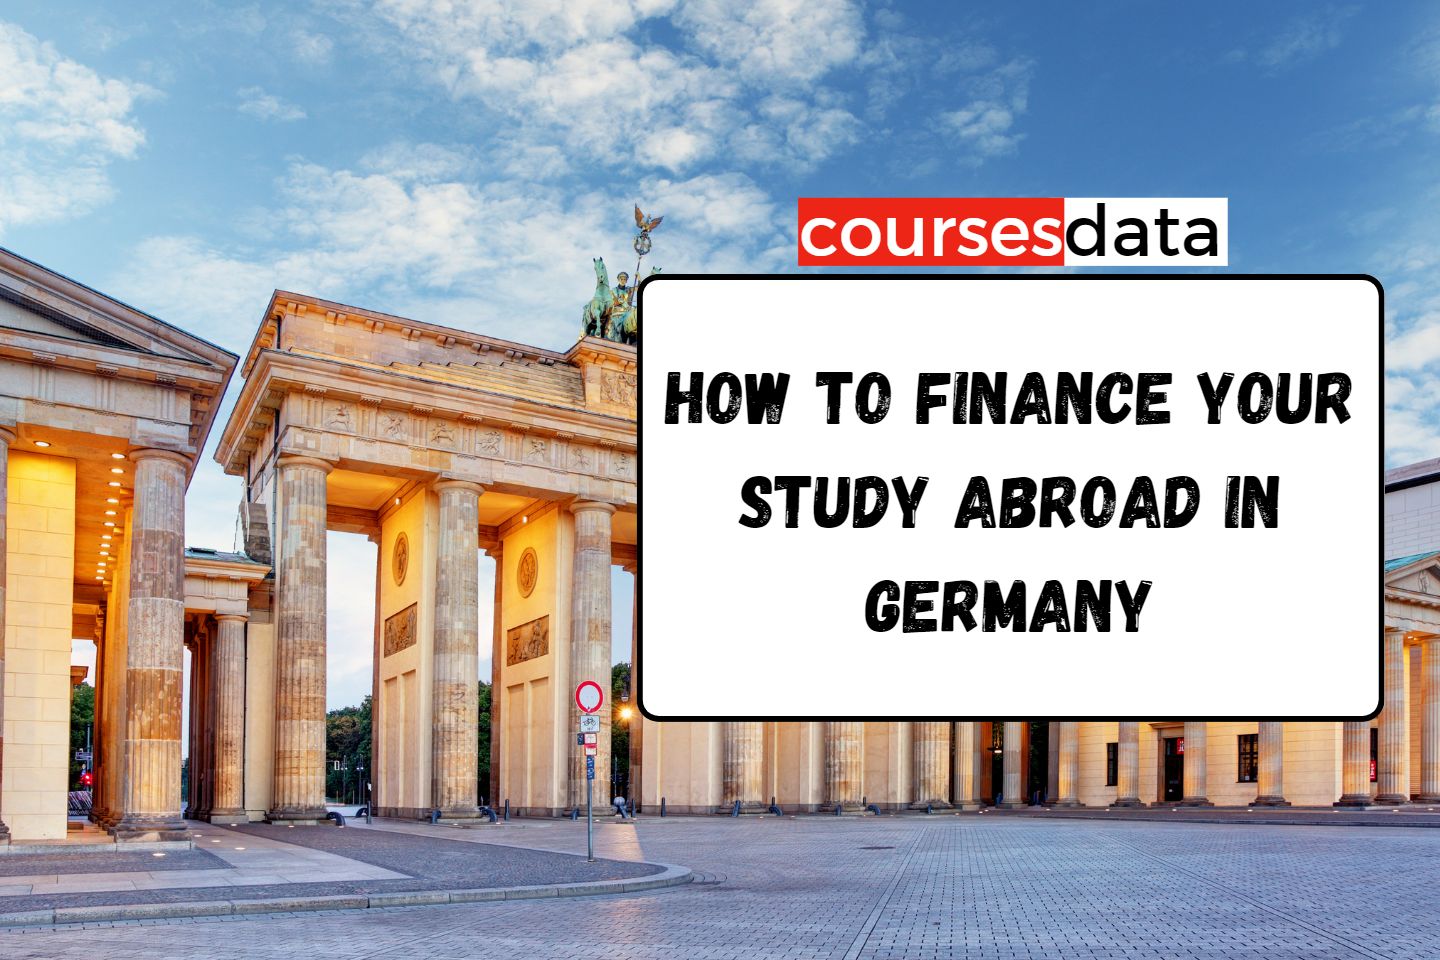 How to Finance Your Study Abroad in Germany